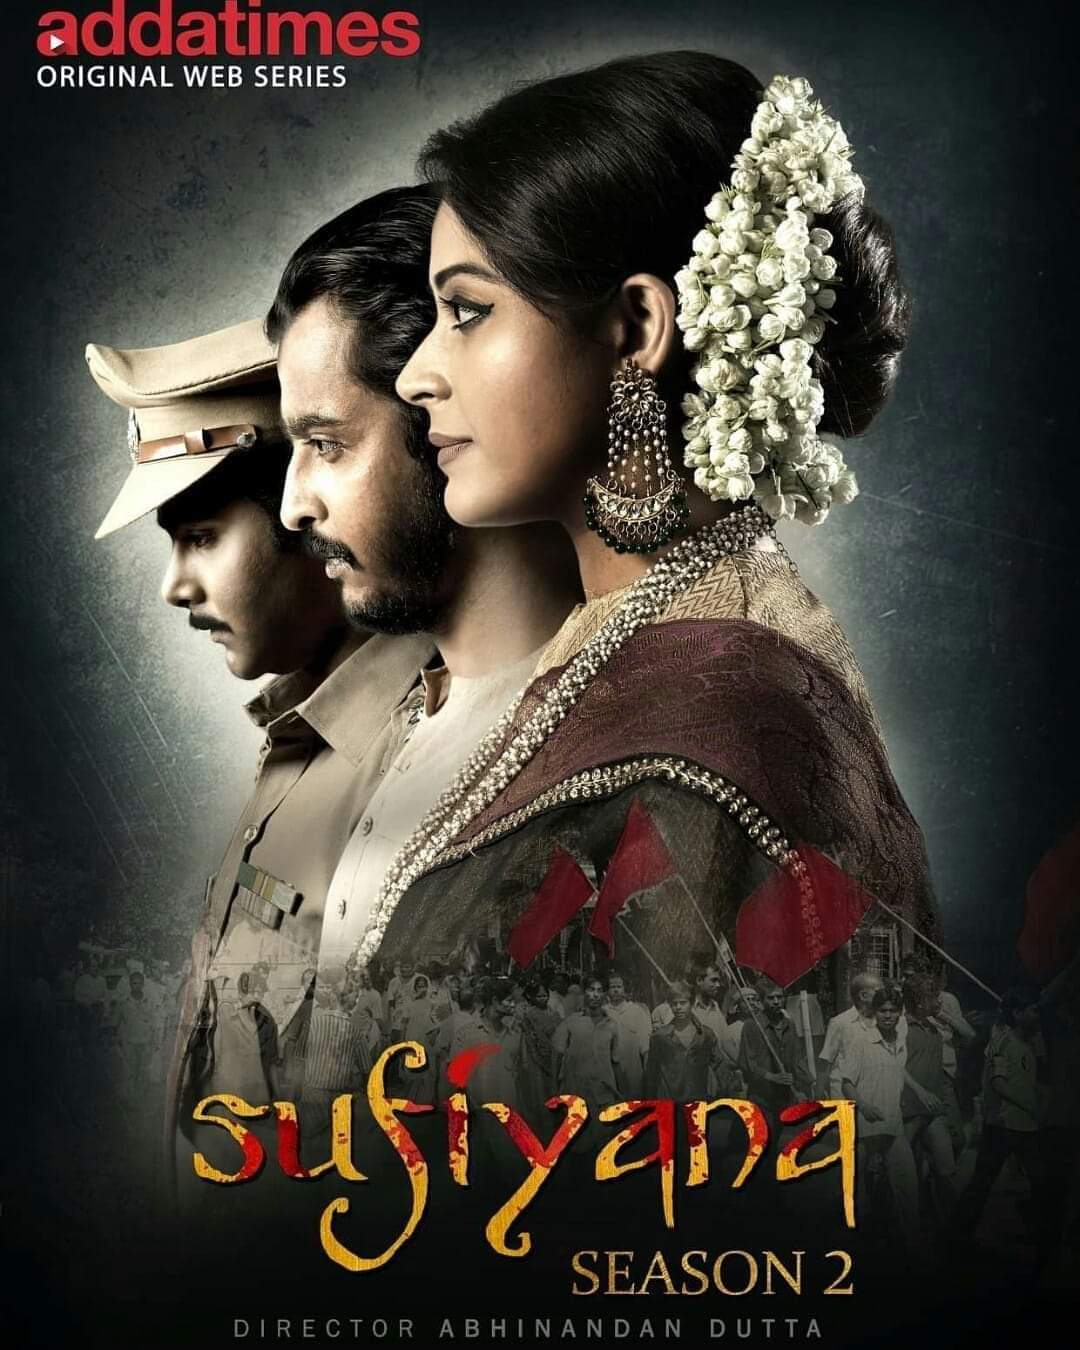 You are currently viewing Sufiyana 2020 Bengali Web Series Season 02 Complete 480p WEB-DL 400MB Download & Watch Online